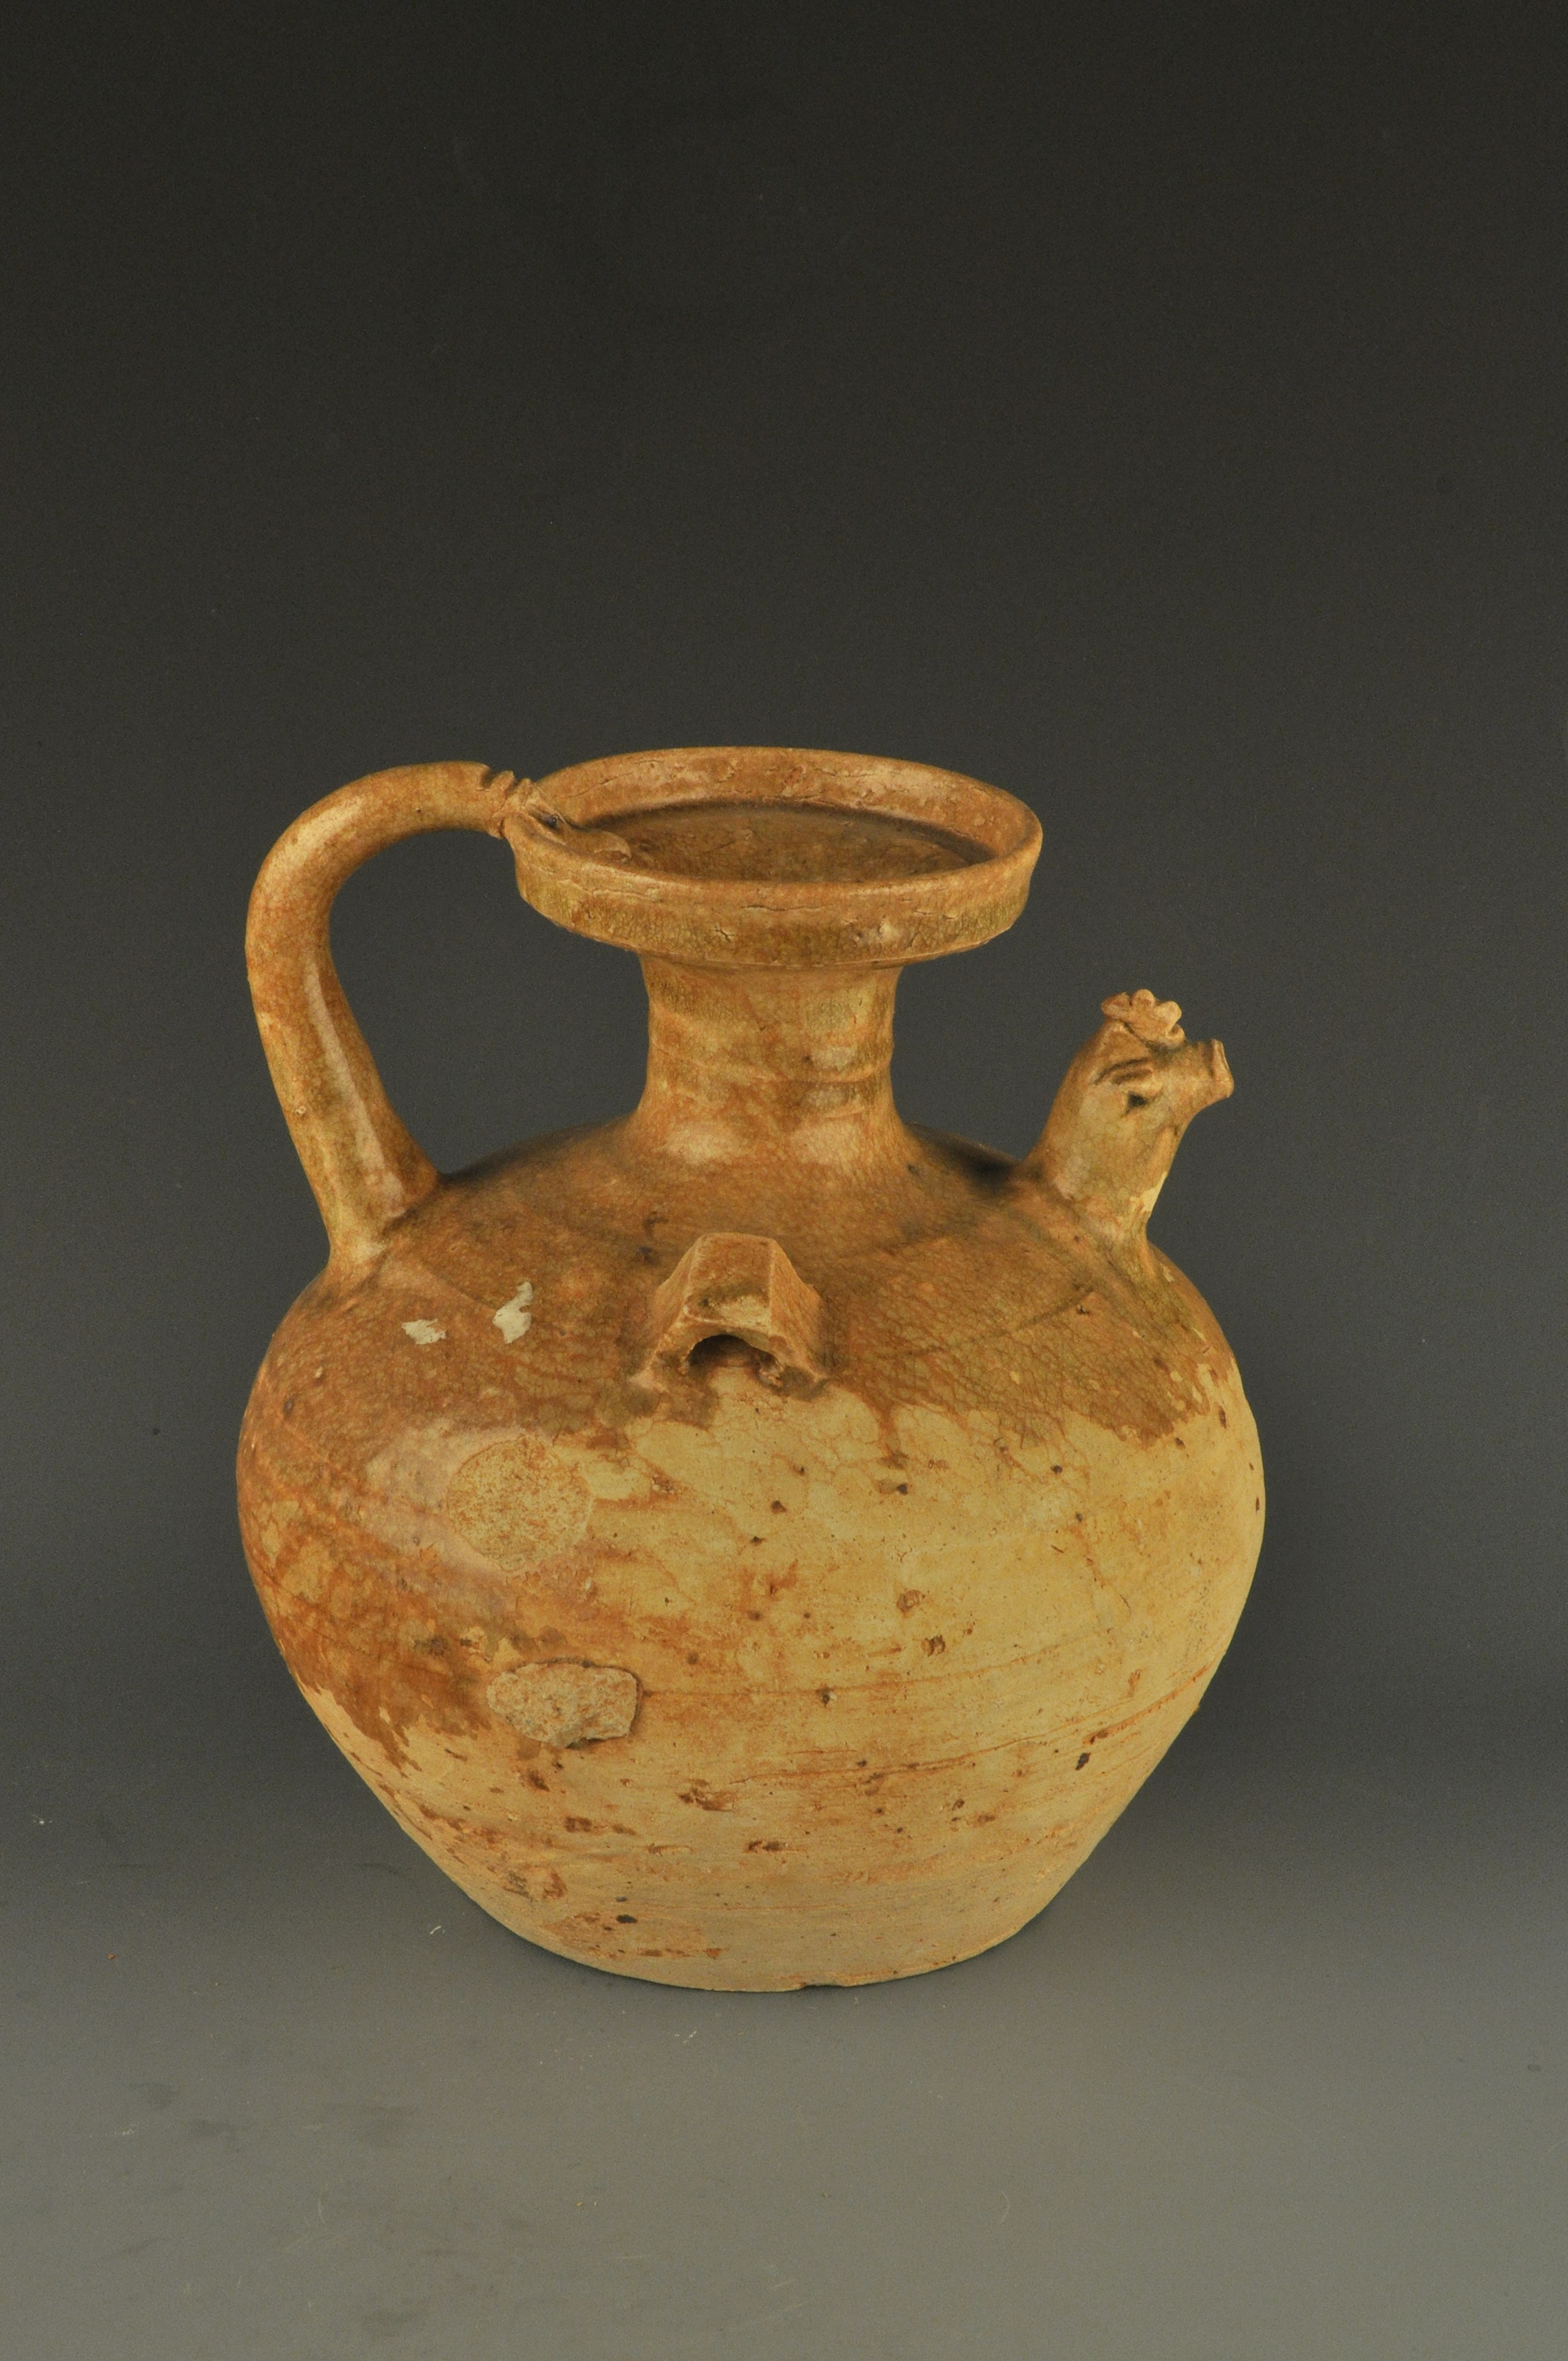 Celadon Pot Made in the Eastern Jin Dynasty with Plate-like Mouth and Chicken-head-shaped Spout